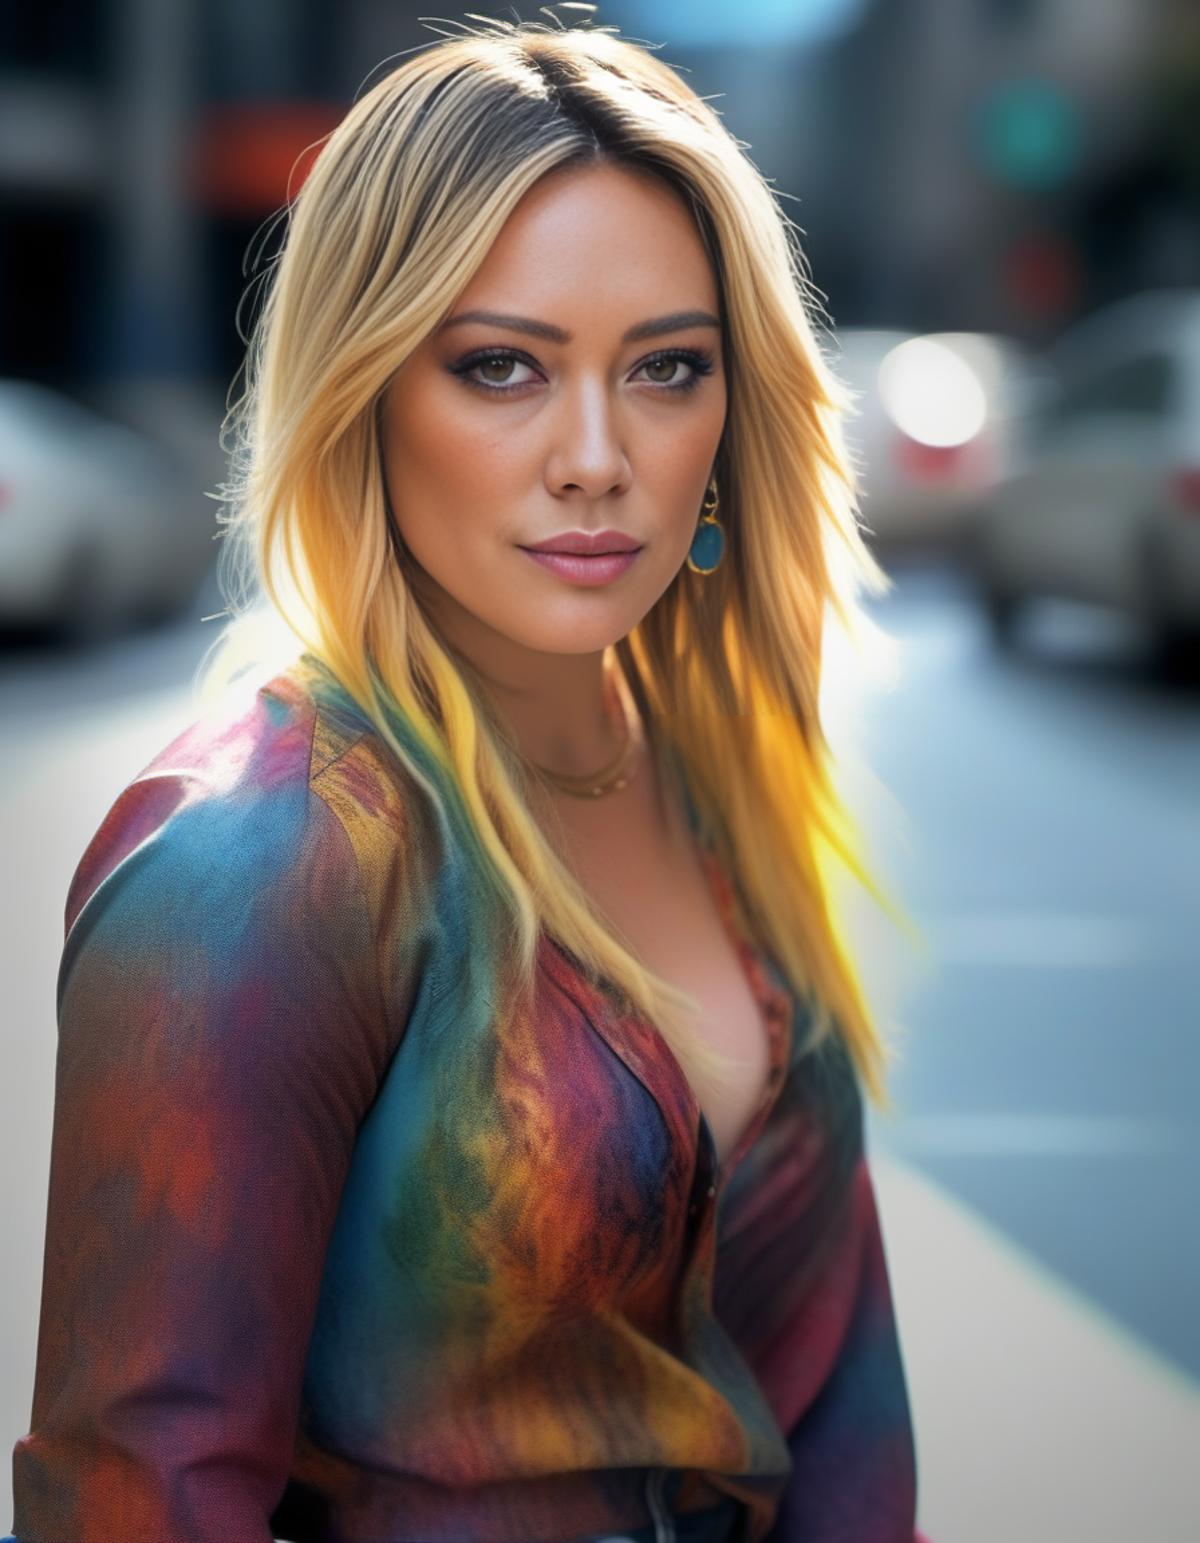 Hilary Duff image by parar20